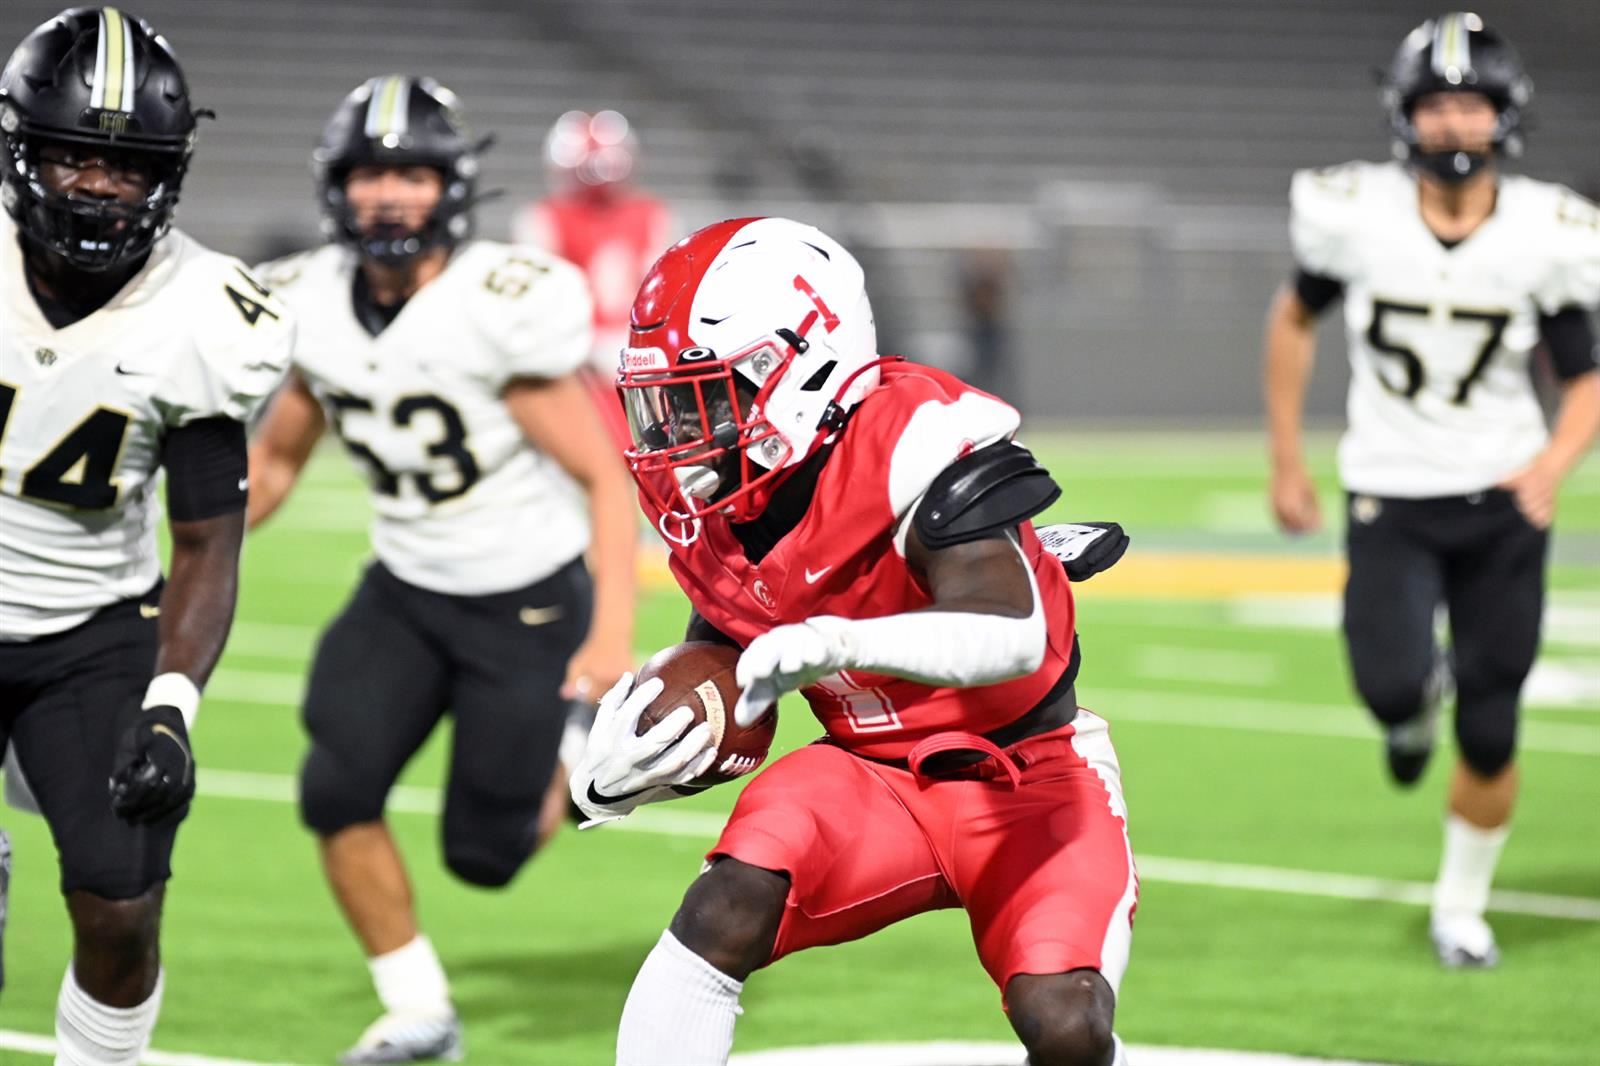 Cypress Lakes High School senior running back Darnel Green was named to the All-District 16-6A first team.